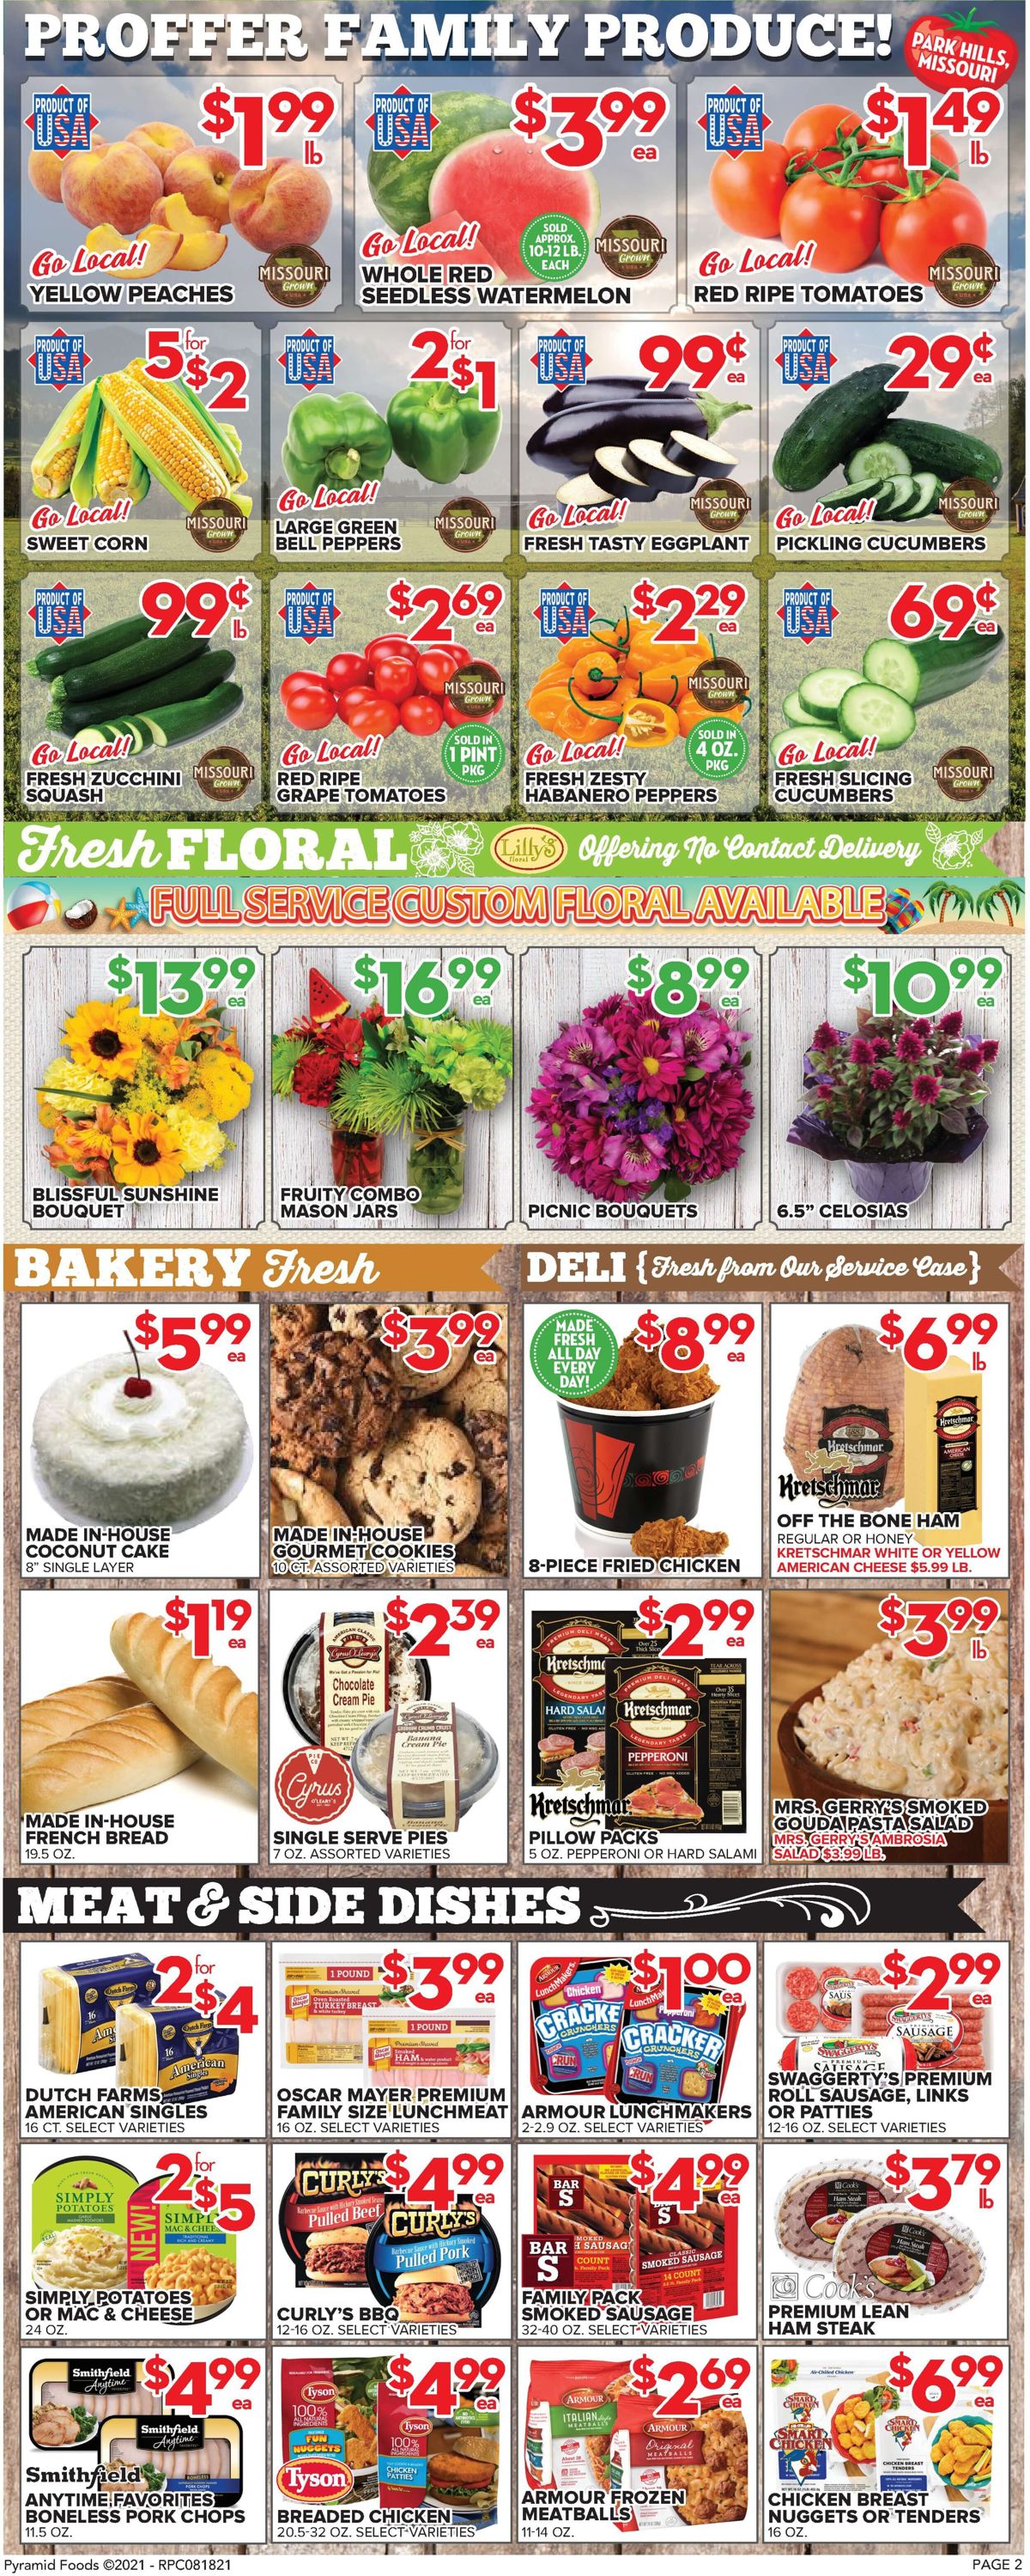 Price Cutter Weekly Ad Circular - valid 08/18-08/24/2021 (Page 2)